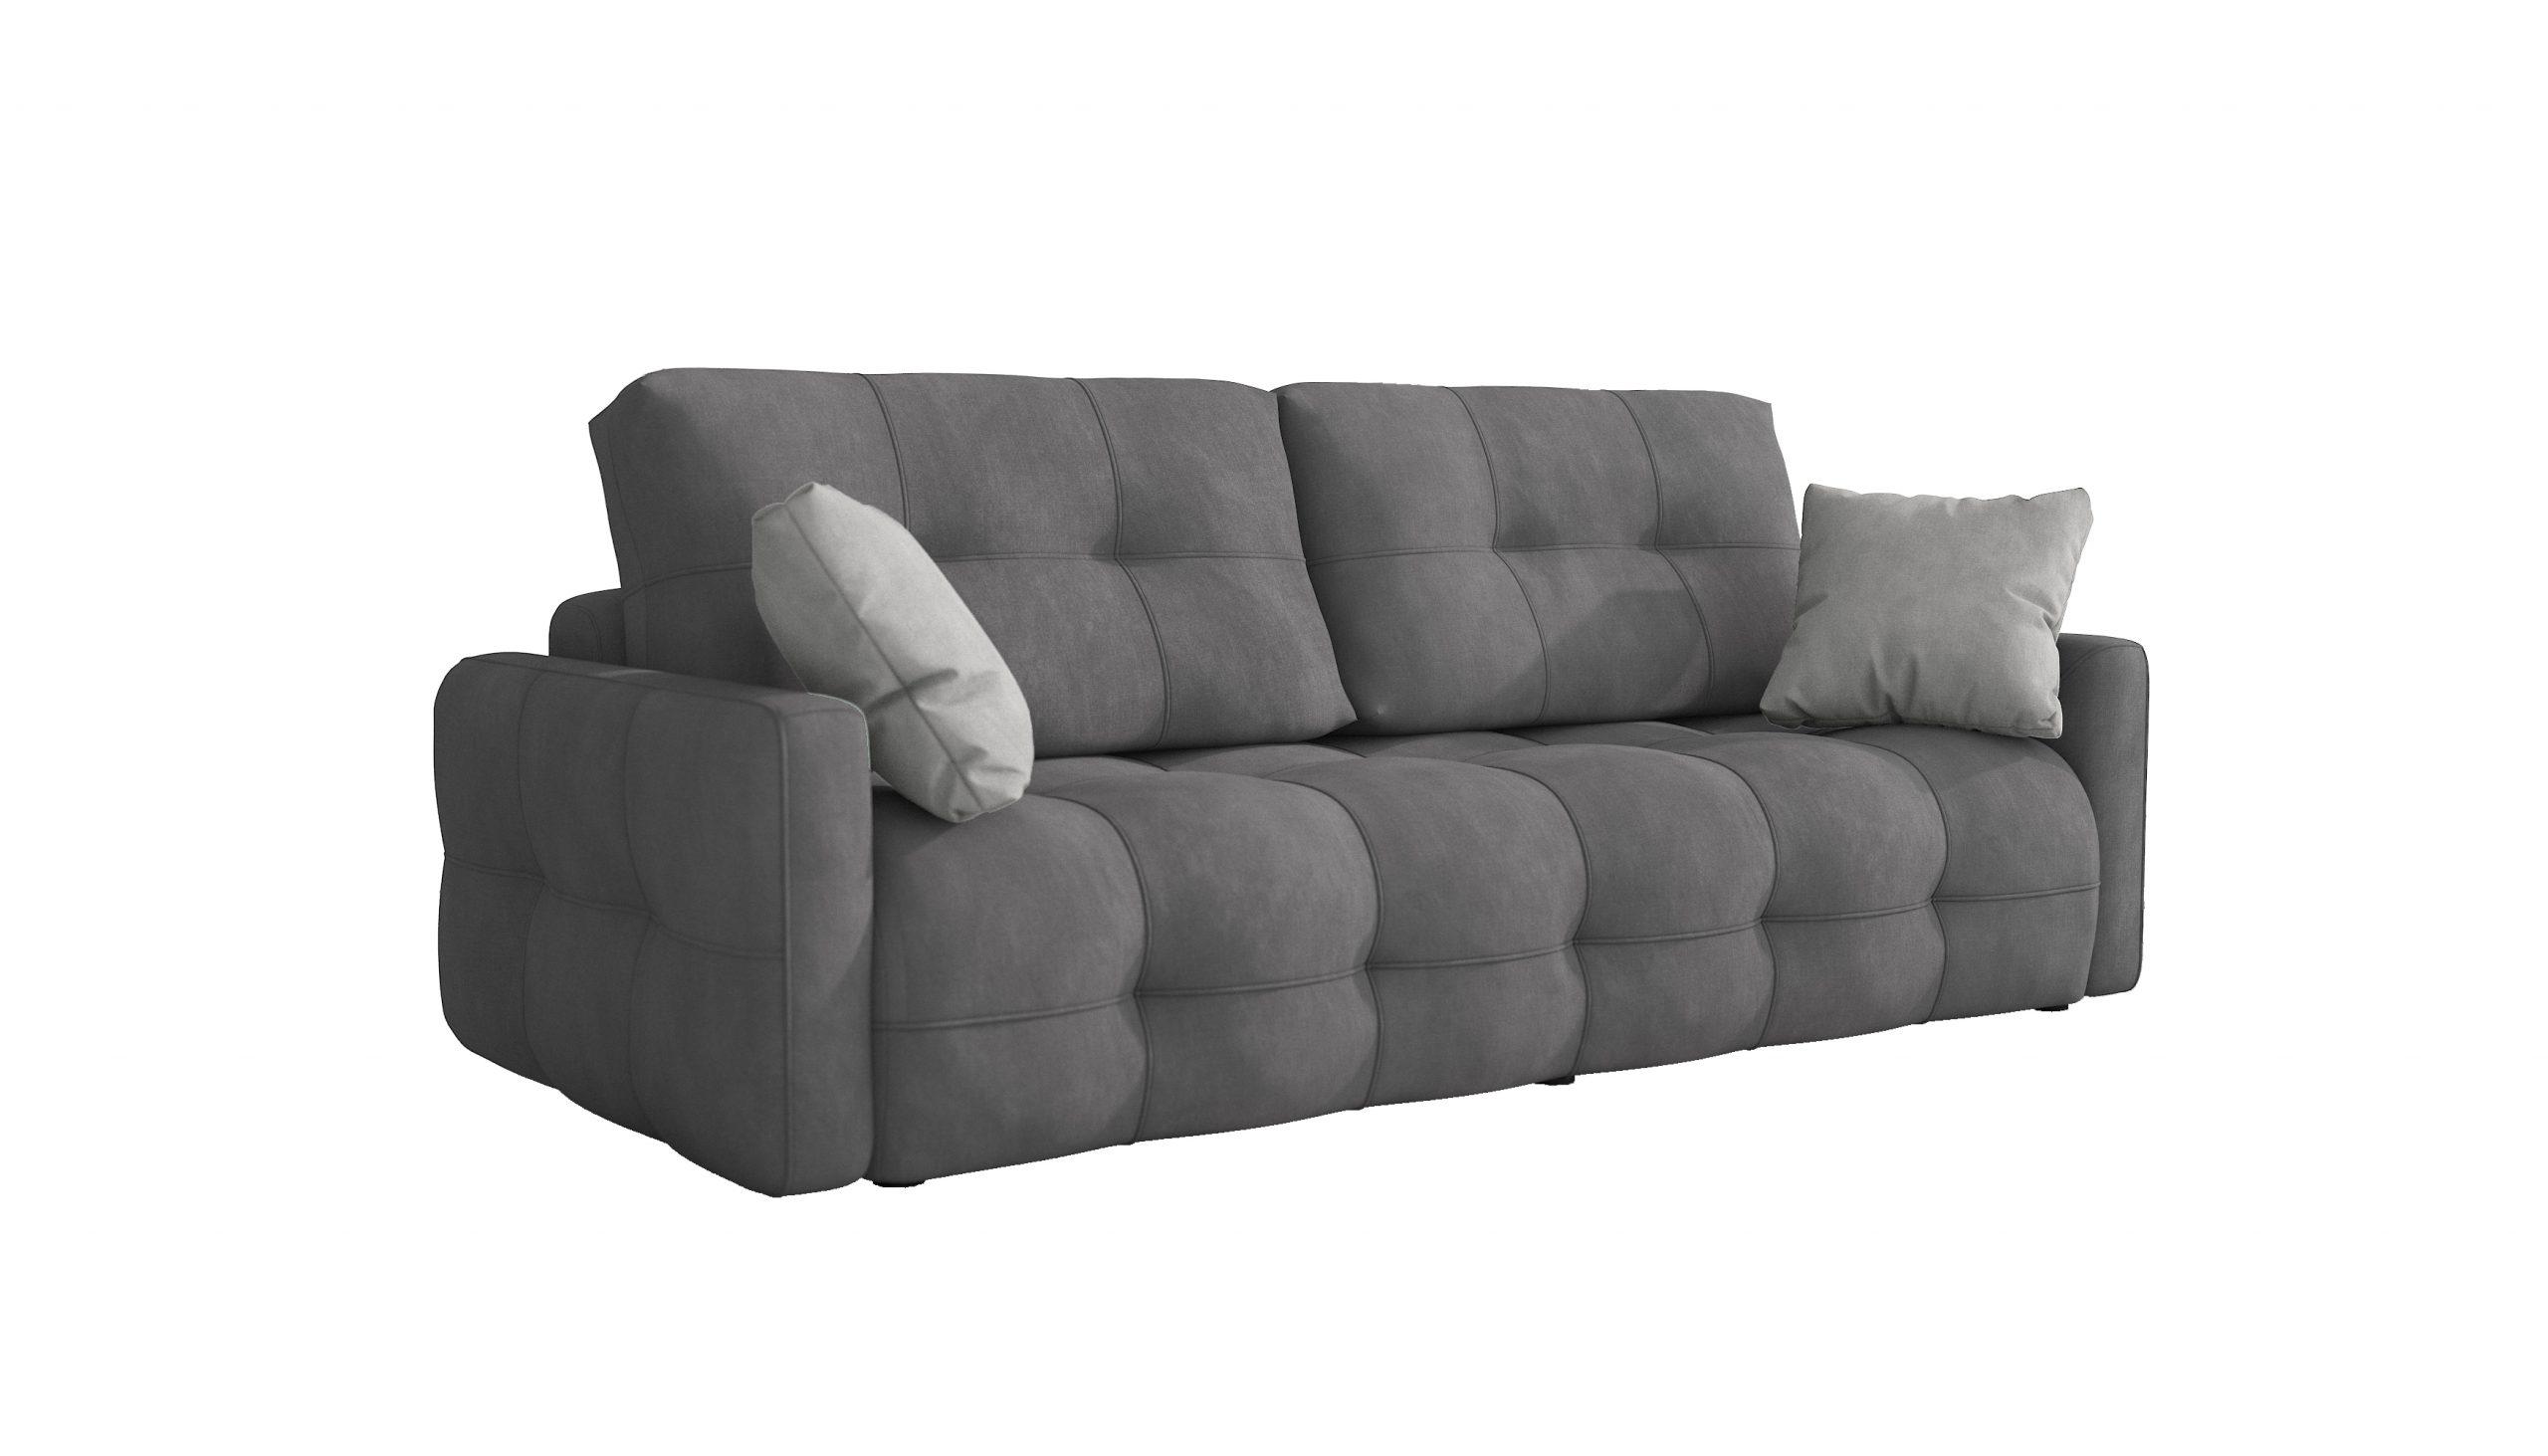   Astrid Queen Sofa Bed Astrid-Grey-Sofa-Bed  